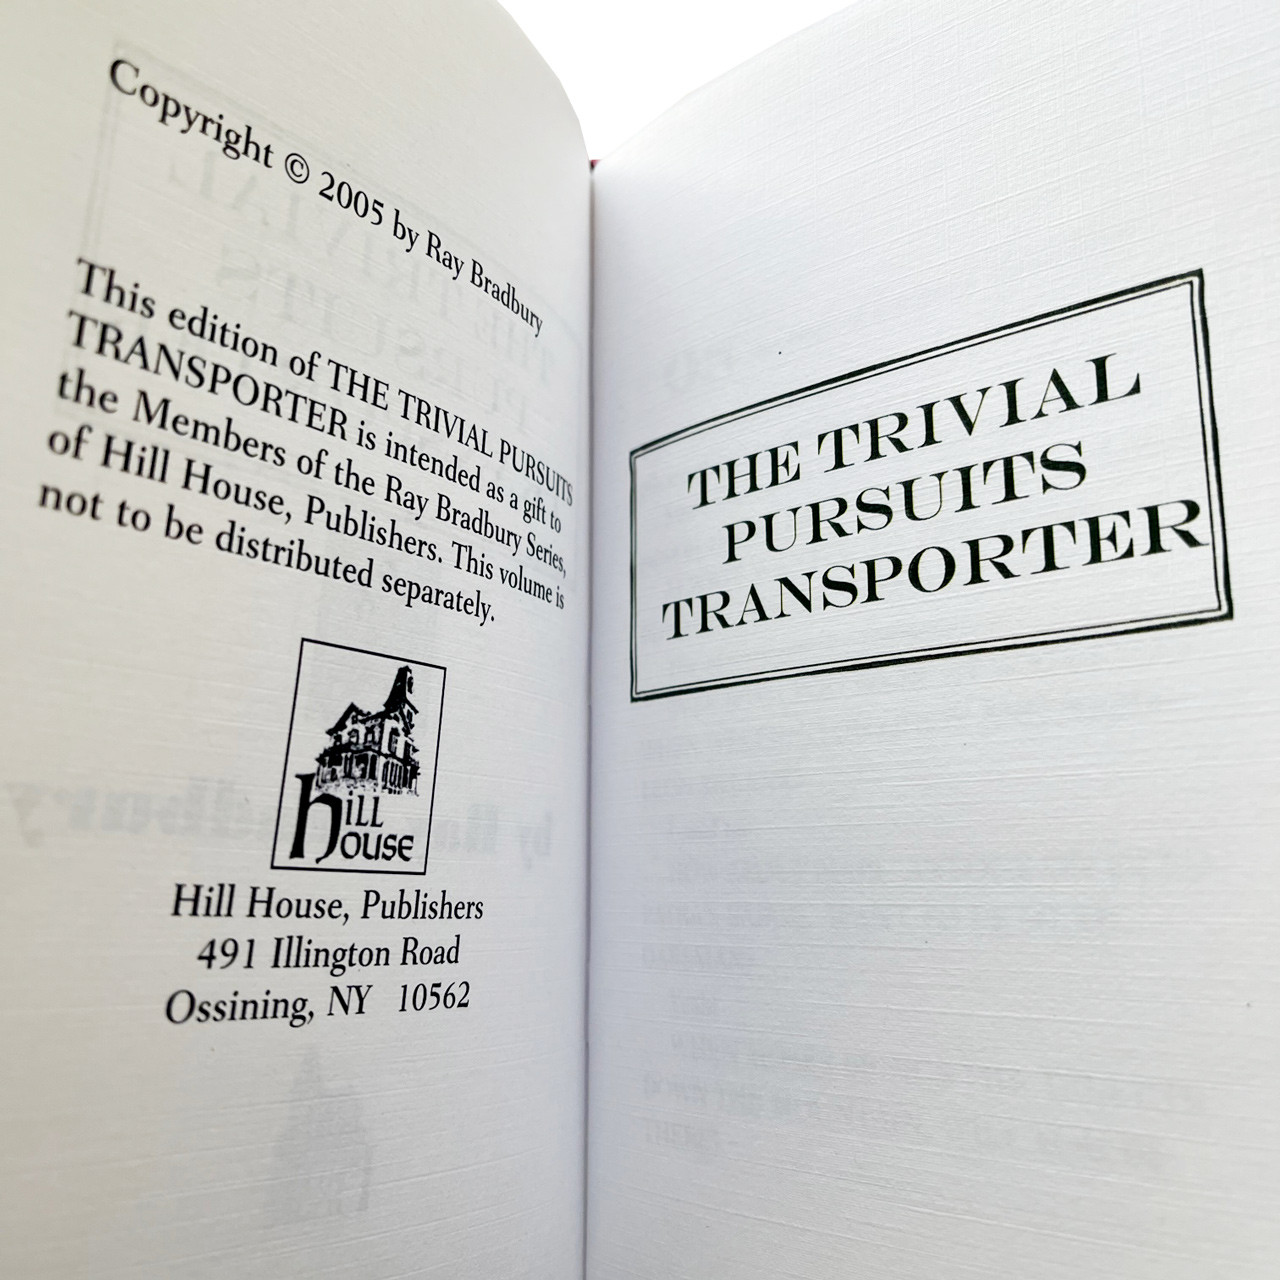 Ray Bradbury "The Trivial Pursuits Transporter" Signed Limited Edition No. 5 of 25 [Very Fine]